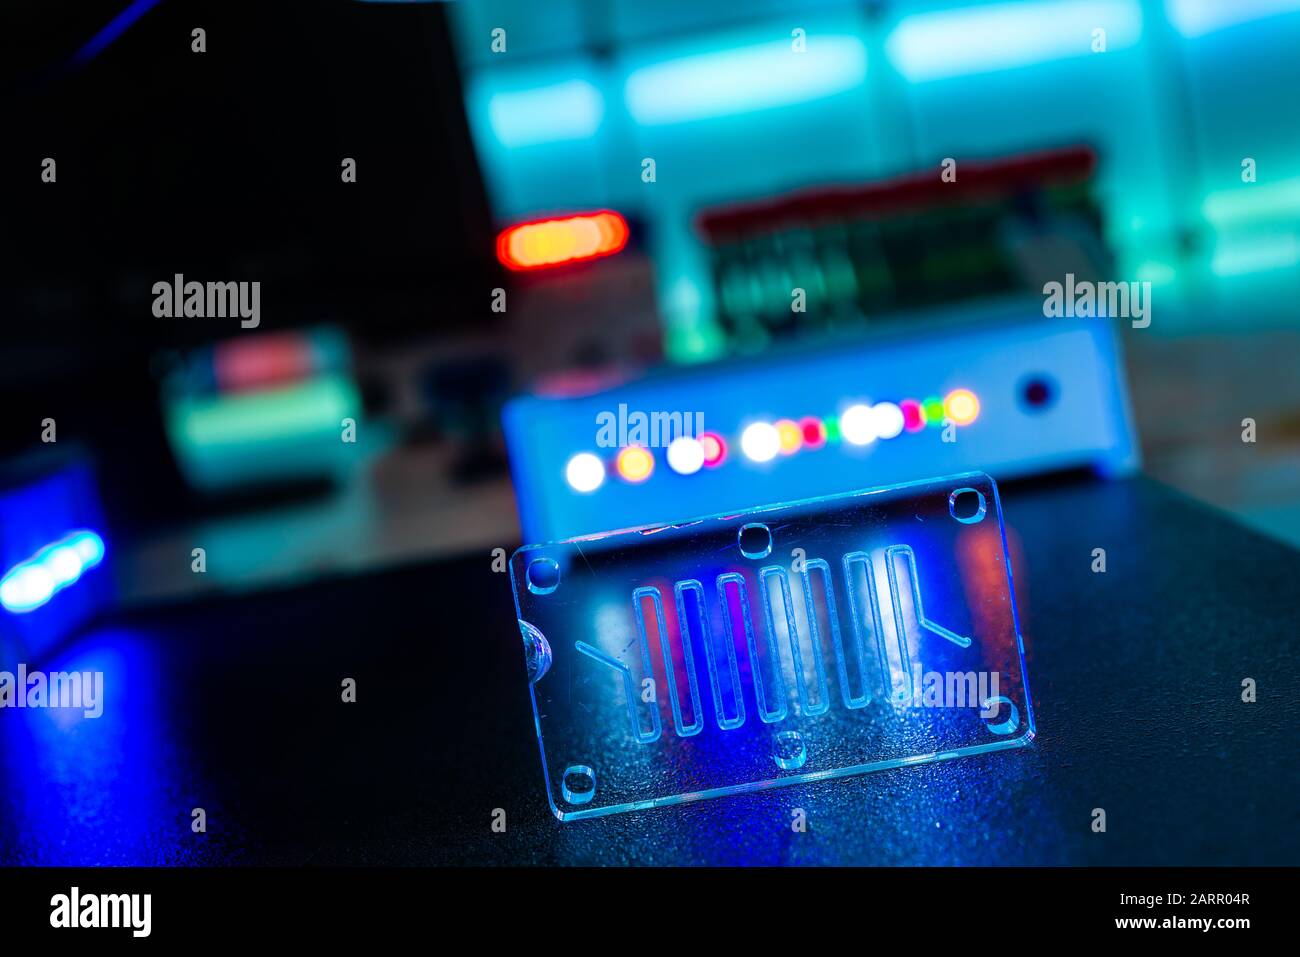 microfluidic device Instrument that uses micro amounts of fluid on a microchip to do certain laboratory tests. Stock Photo